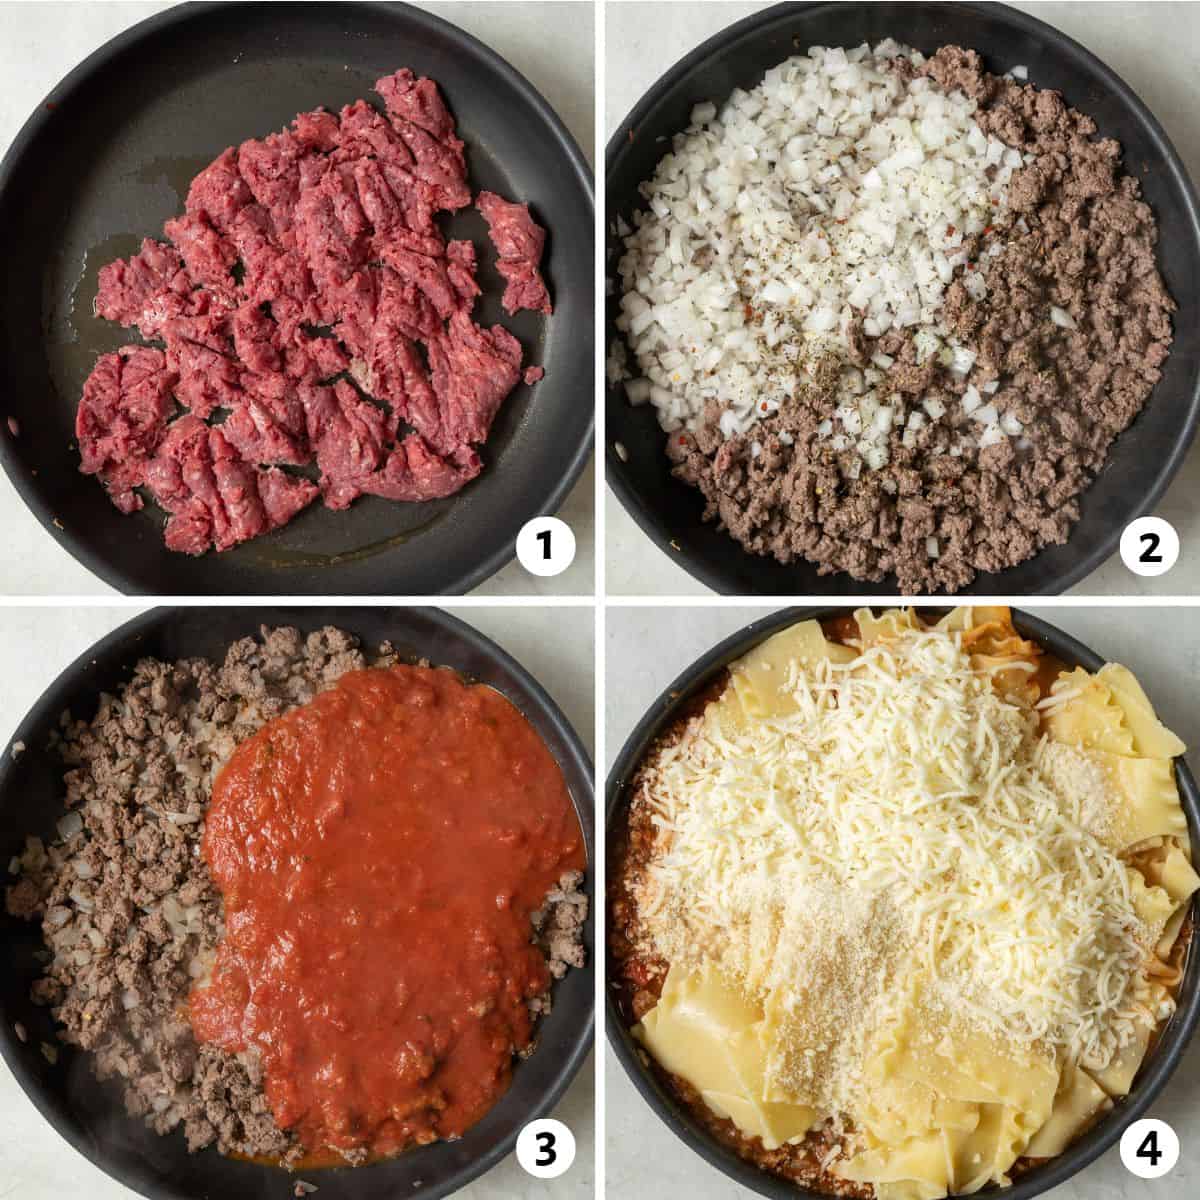 4 image collage making base for recipe: 1- ground beef in a skillet before cooking, 2- after browning and crumbling beef with onion and seasonings added, 3- marinara added, 4- cooked lasagna pasta pieces added with cheese on top before tossing together.